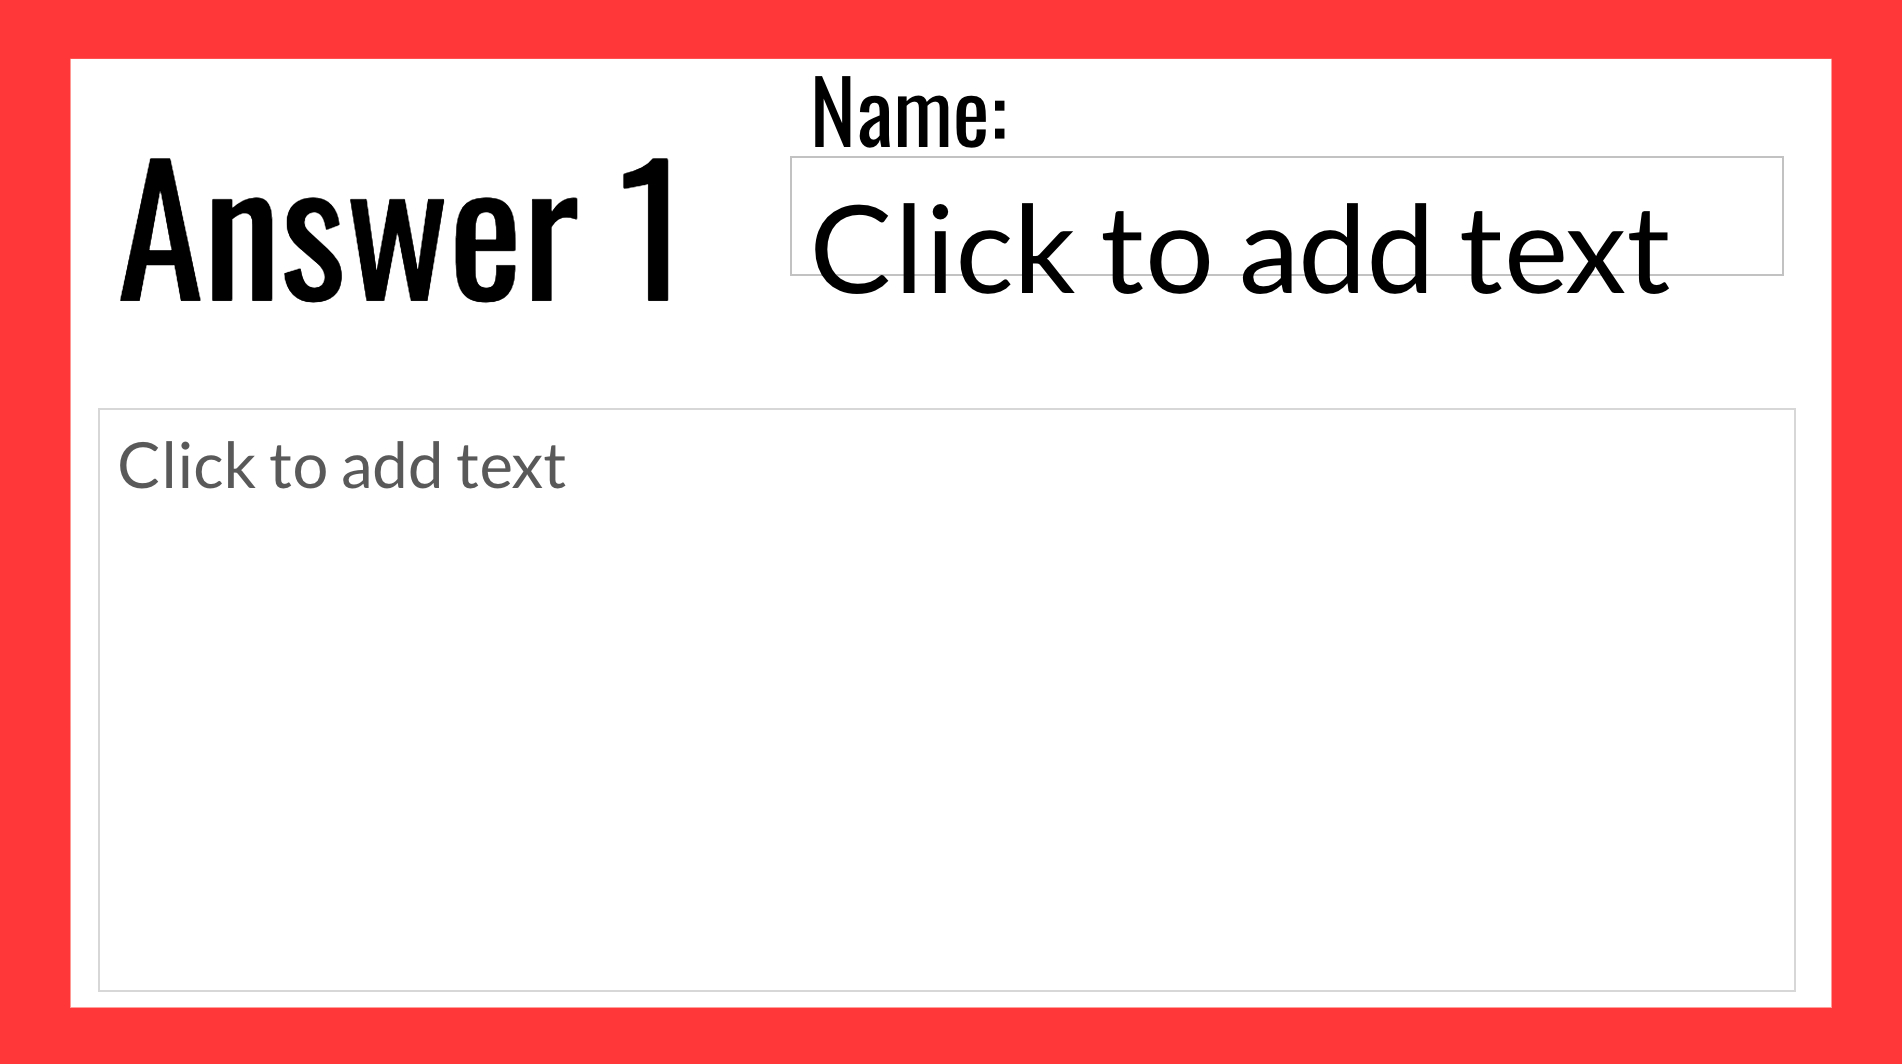 Sliding New Activities Into Google Slides | Zak.io In Words Their Way Blank Sort Template